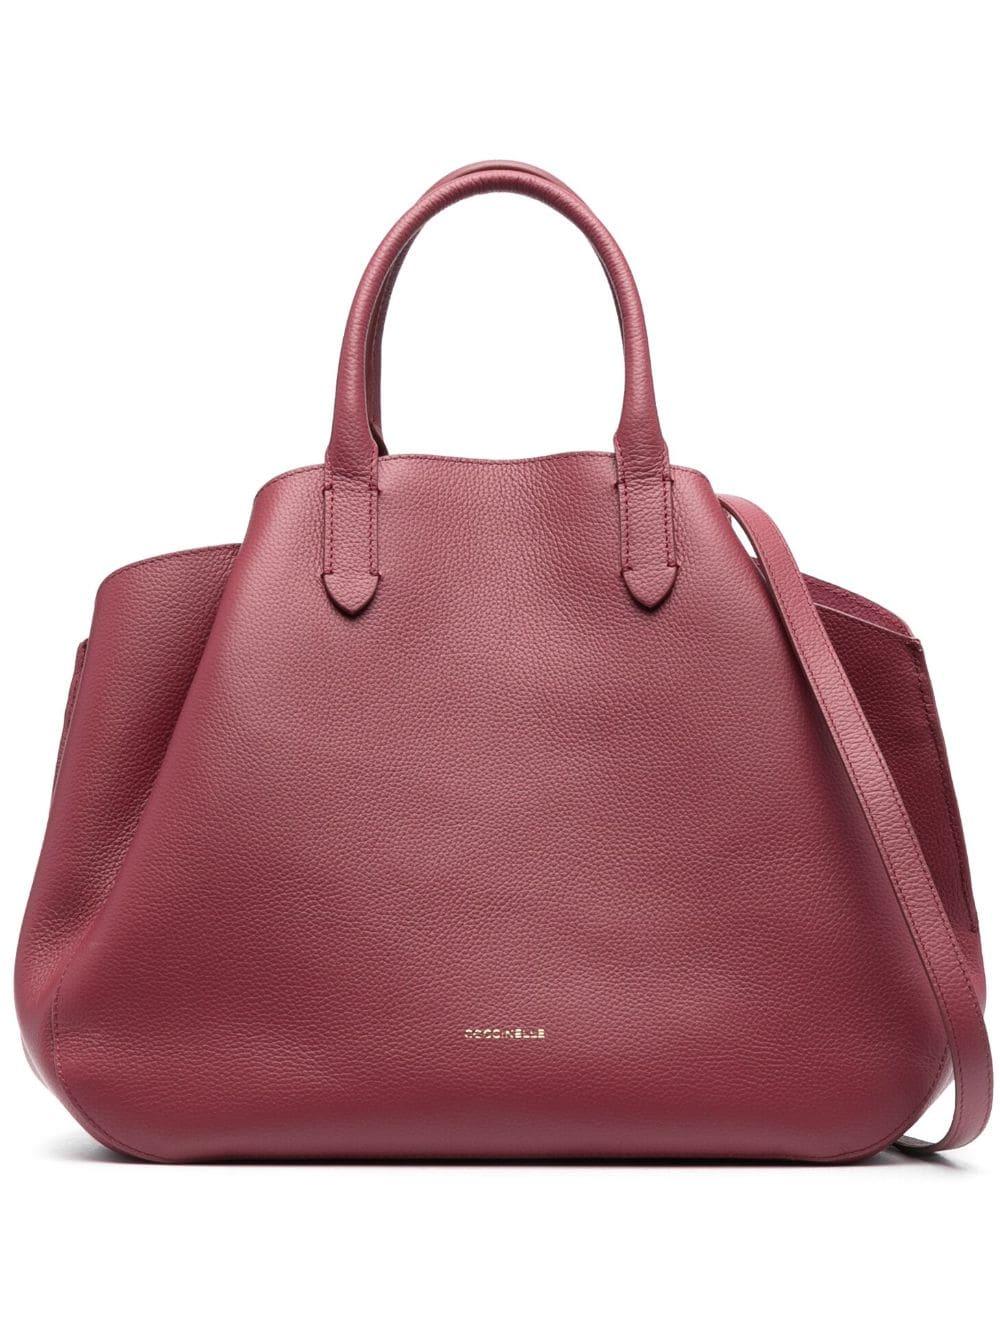 Coccinelle Medium Soft-wear Leather Tote Bag in Red | Lyst Australia